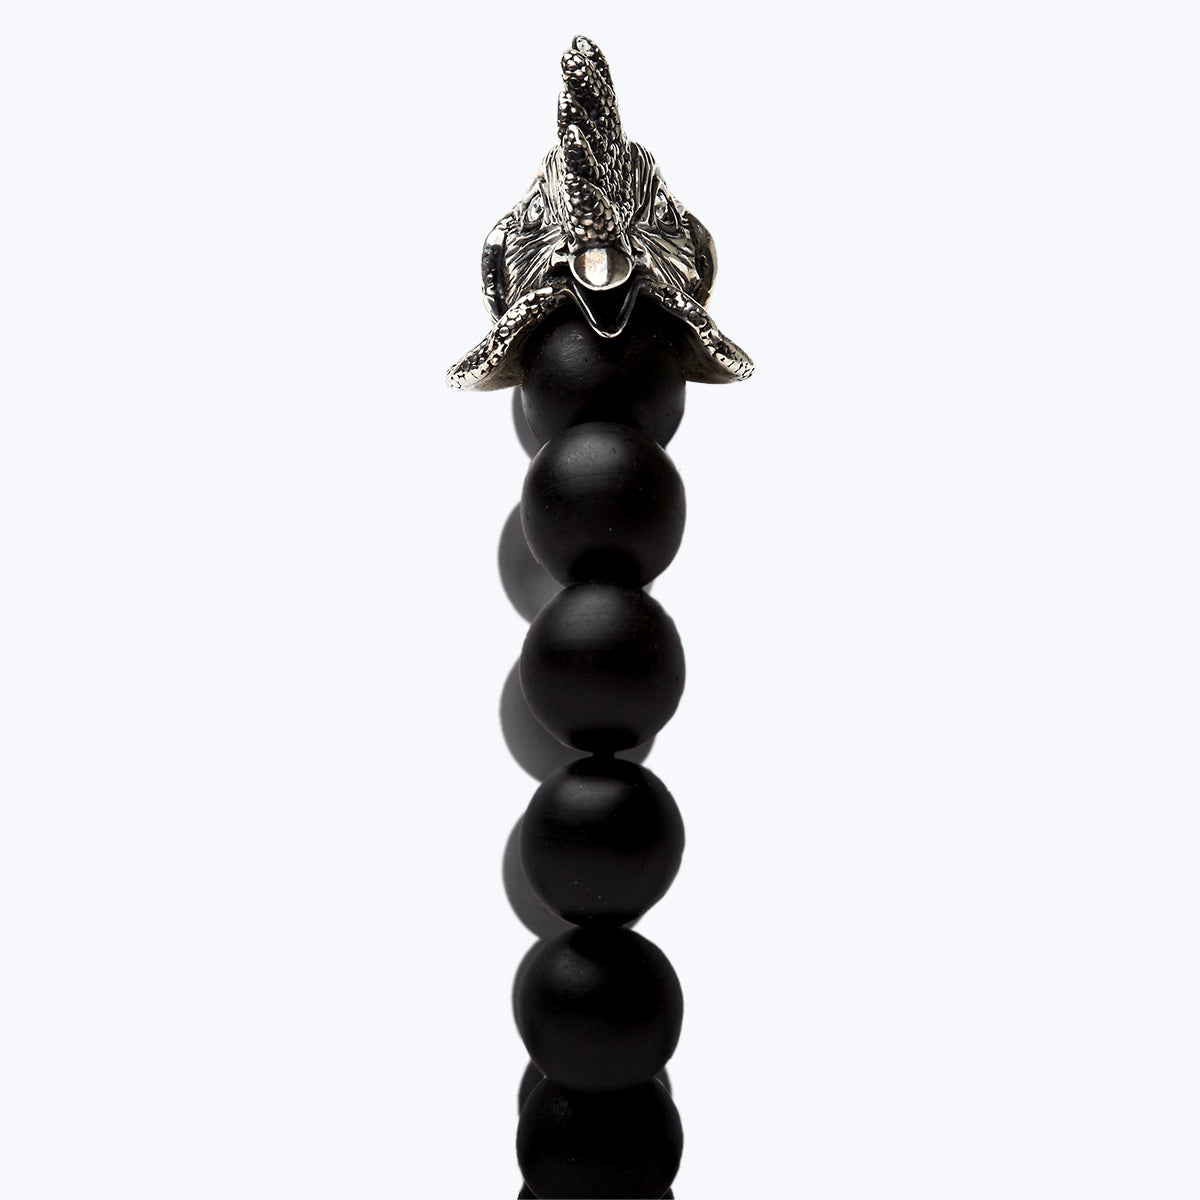 Chinese Zodiac Ebony Bead Bracelet - Year of the Rooster